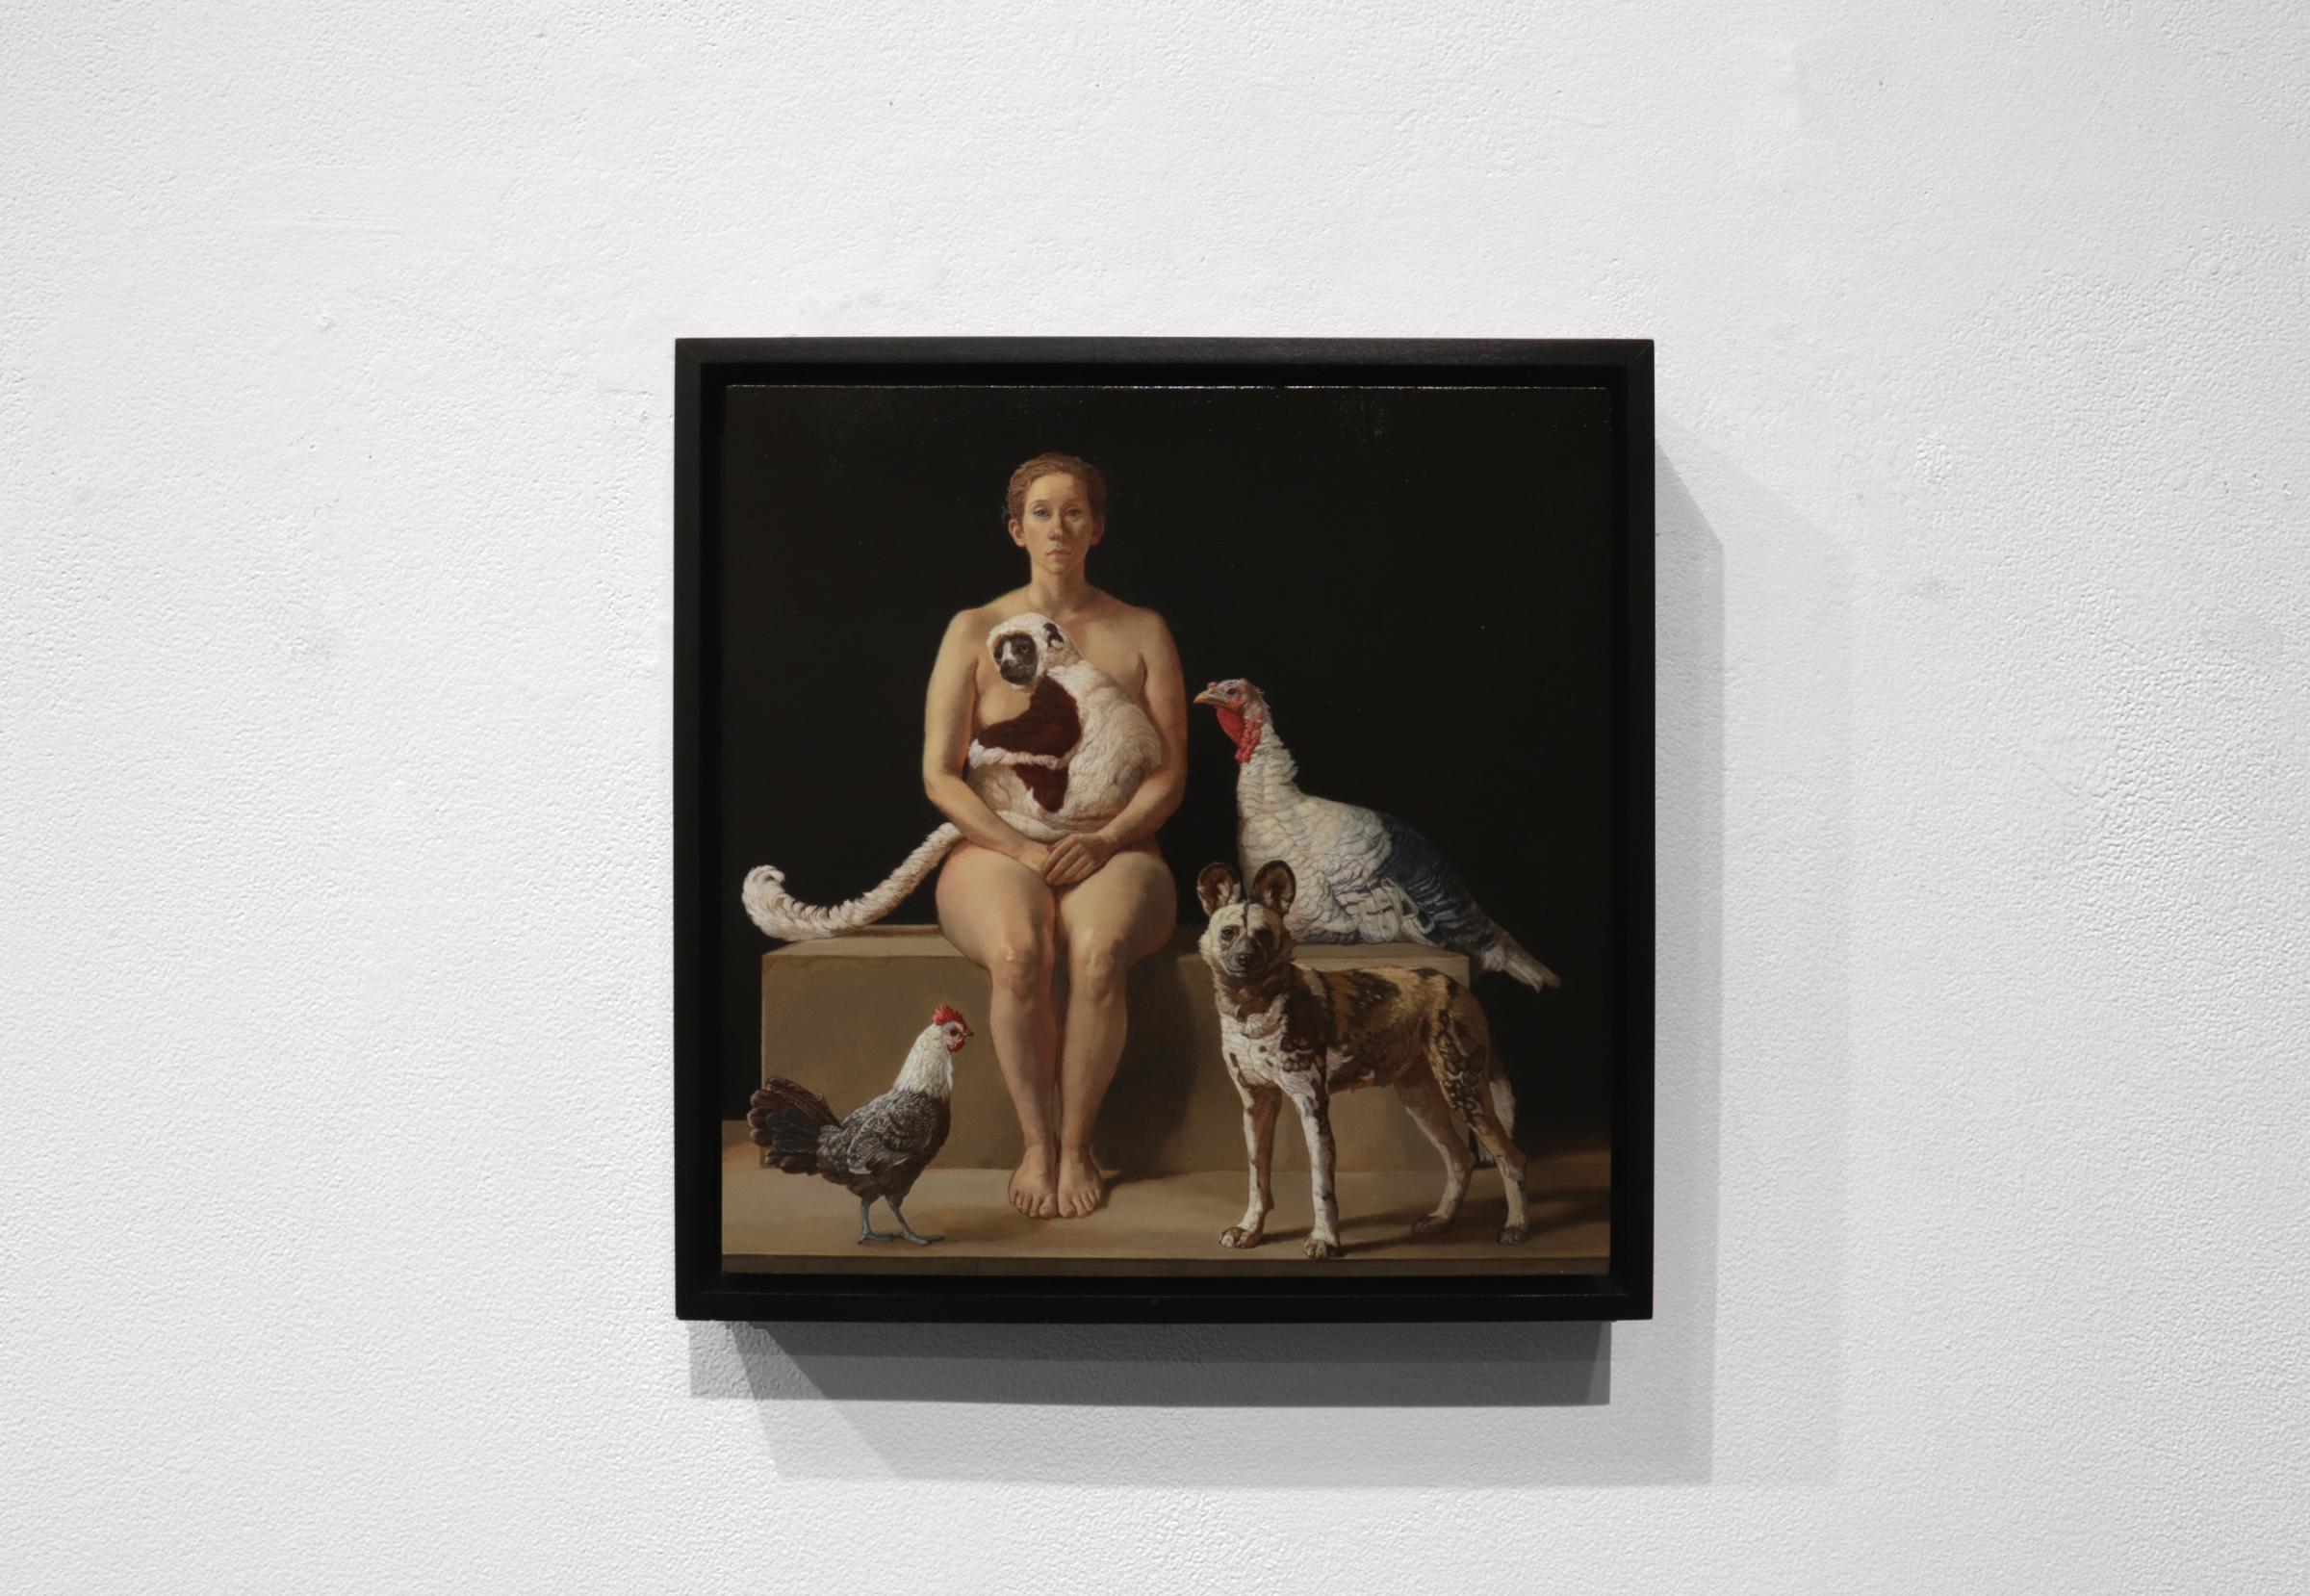 Patricia Traub’s empathy shapes the manner in which she composes her paintings. She draws live subjects and develops her paintings from the drawings. Each animal is carefully observed as an individual, its feathers, fur, gesture, and weight carrying